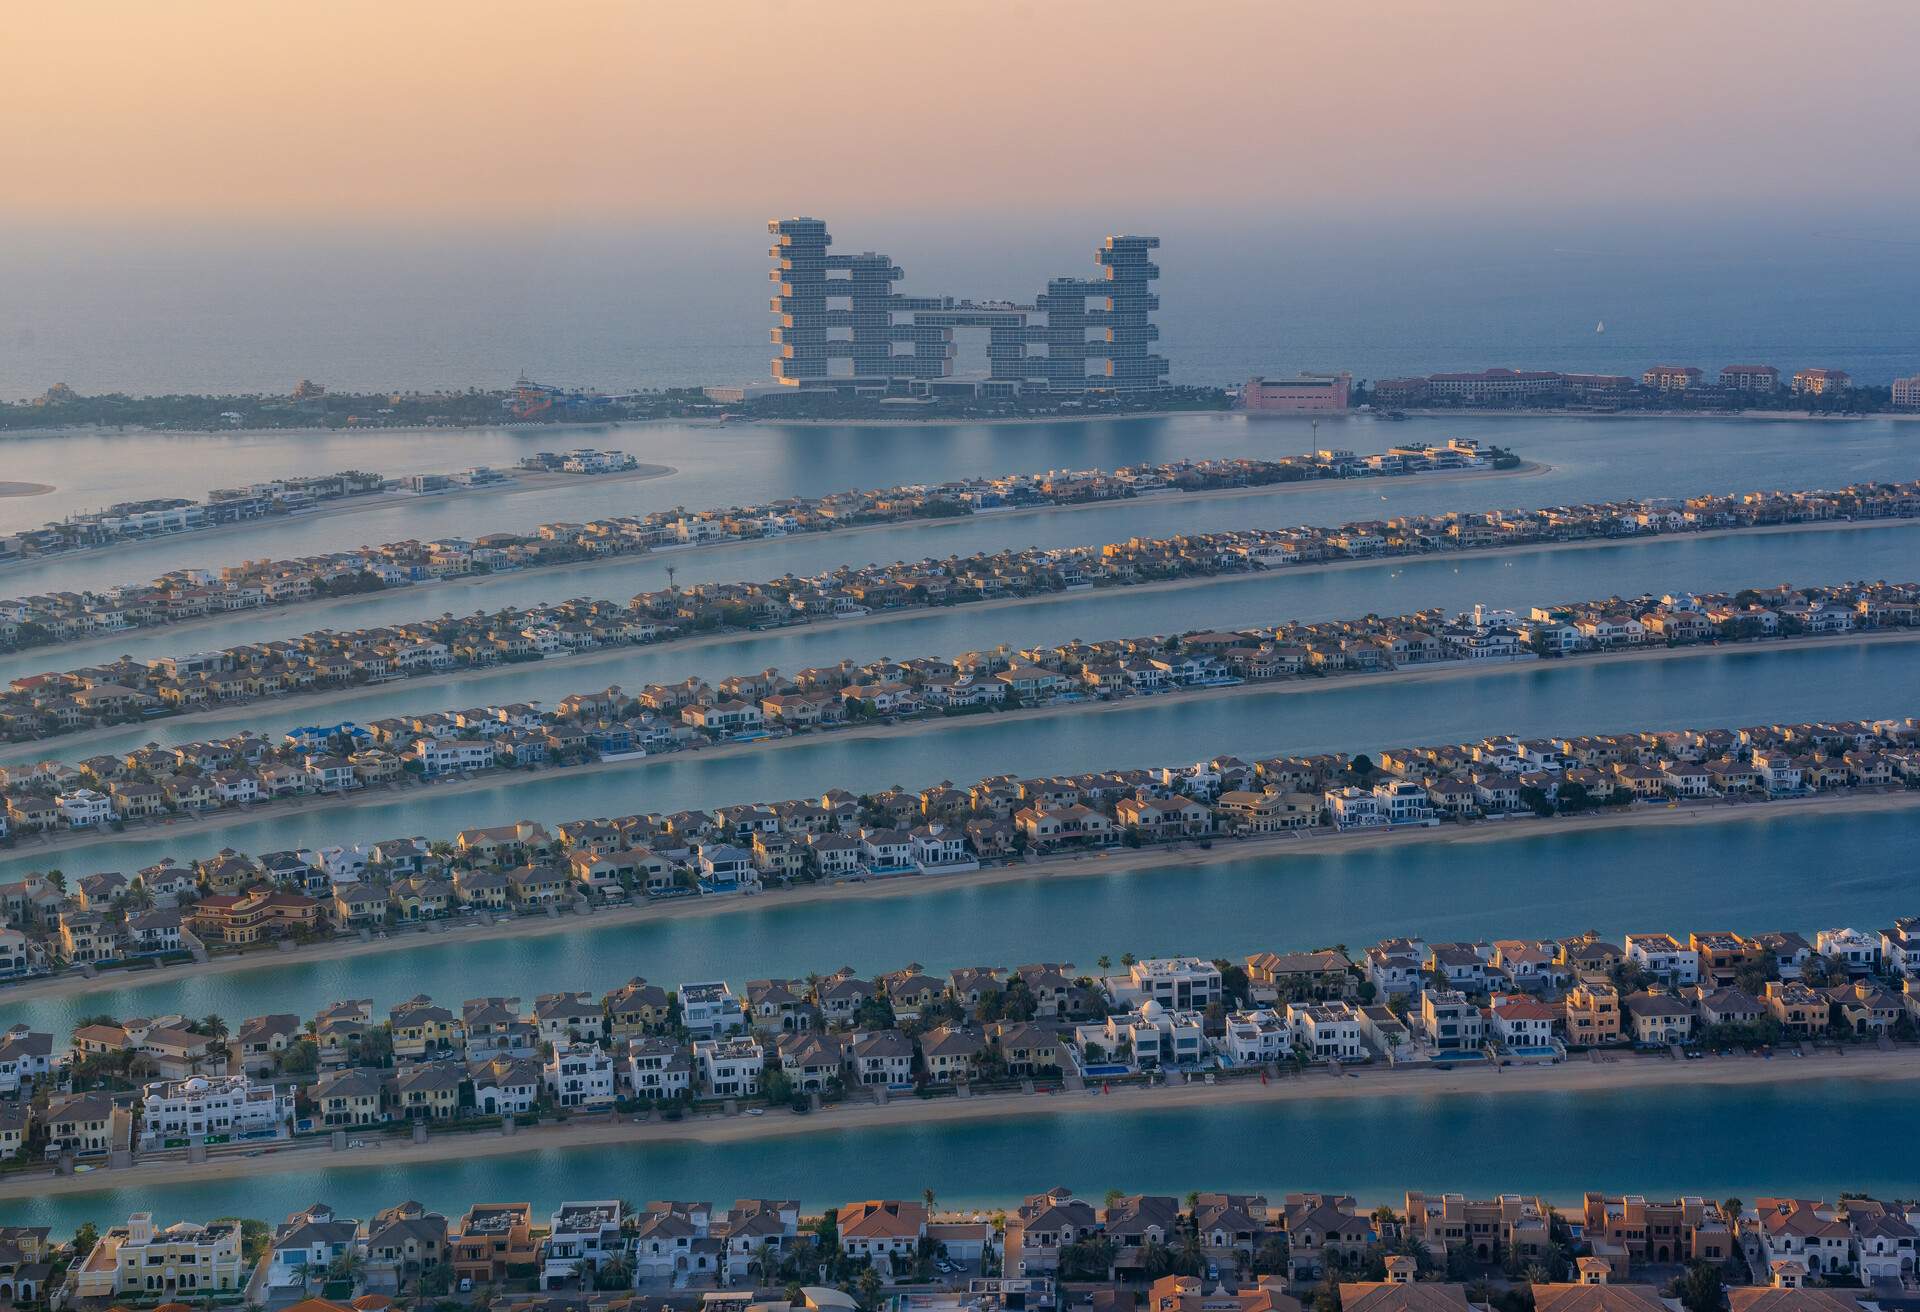 An evening shot of rows of houses on the artificial island 'The Palm' in Dubai with the big hotel 'Atlantis The Royal' in the background